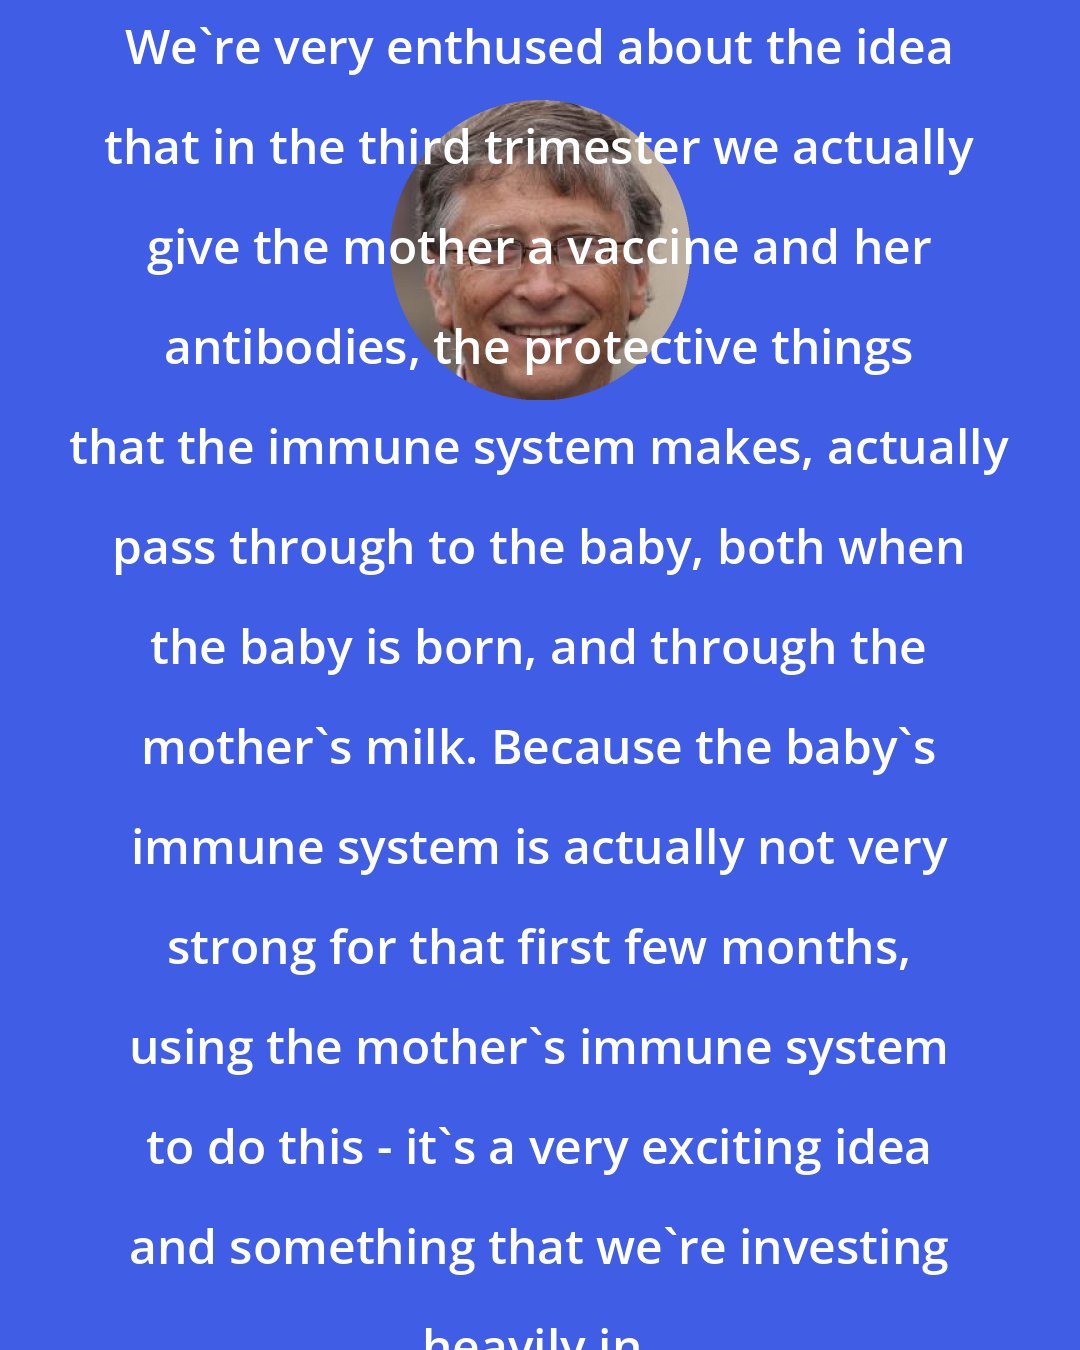 Bill Gates: We're very enthused about the idea that in the third trimester we actually give the mother a vaccine and her antibodies, the protective things that the immune system makes, actually pass through to the baby, both when the baby is born, and through the mother's milk. Because the baby's immune system is actually not very strong for that first few months, using the mother's immune system to do this - it's a very exciting idea and something that we're investing heavily in.